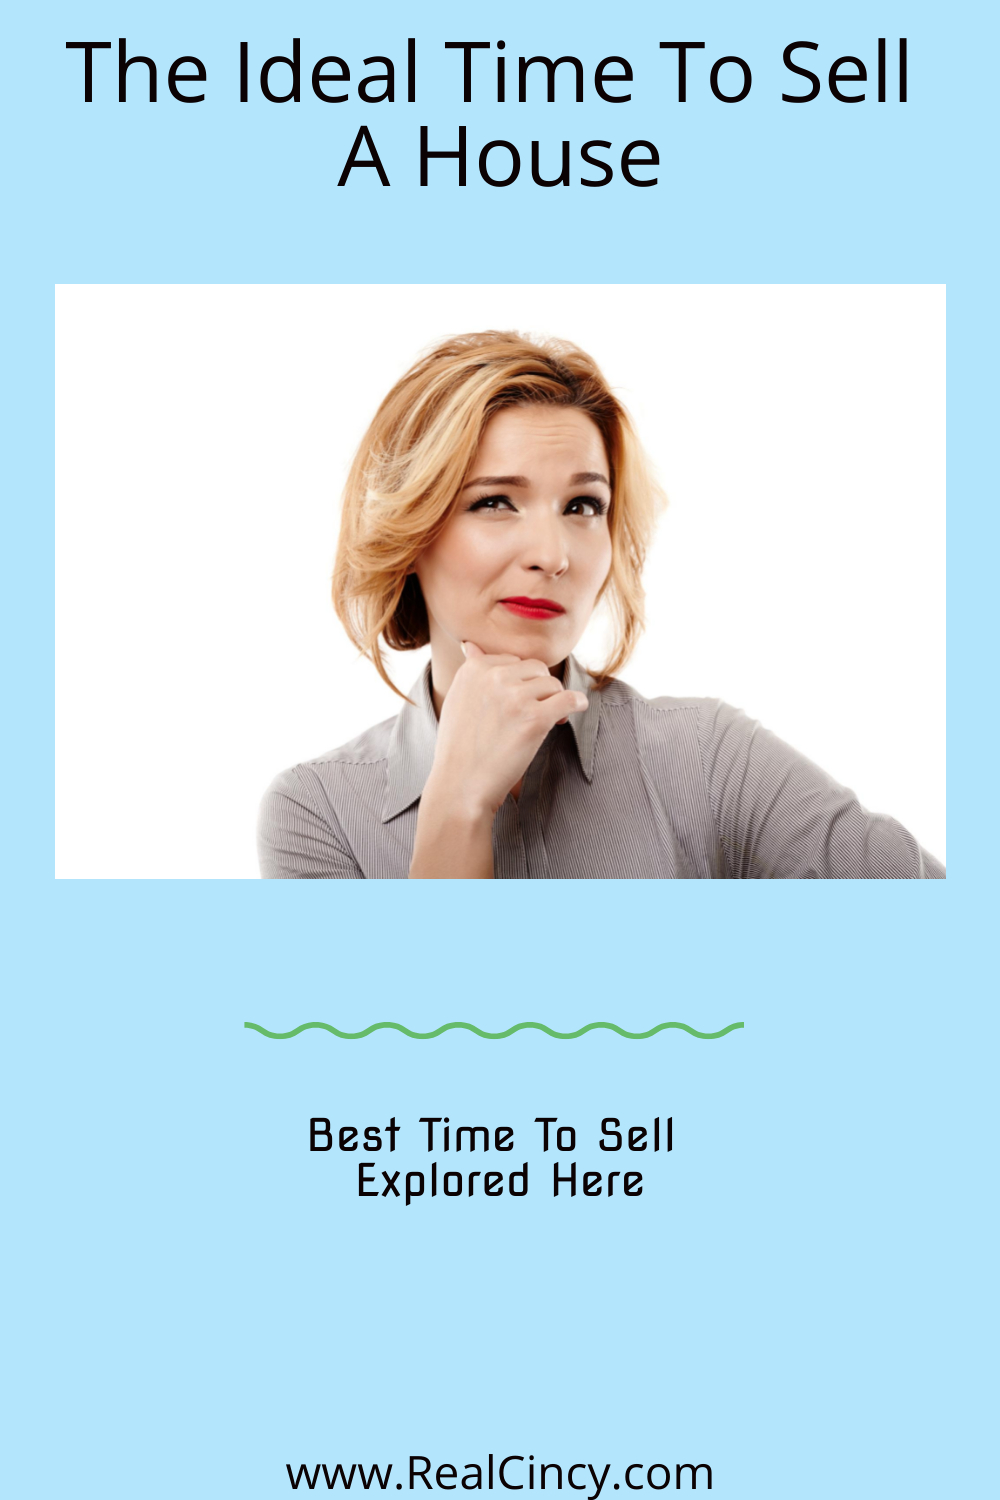 The Ideal Time To Sell A House